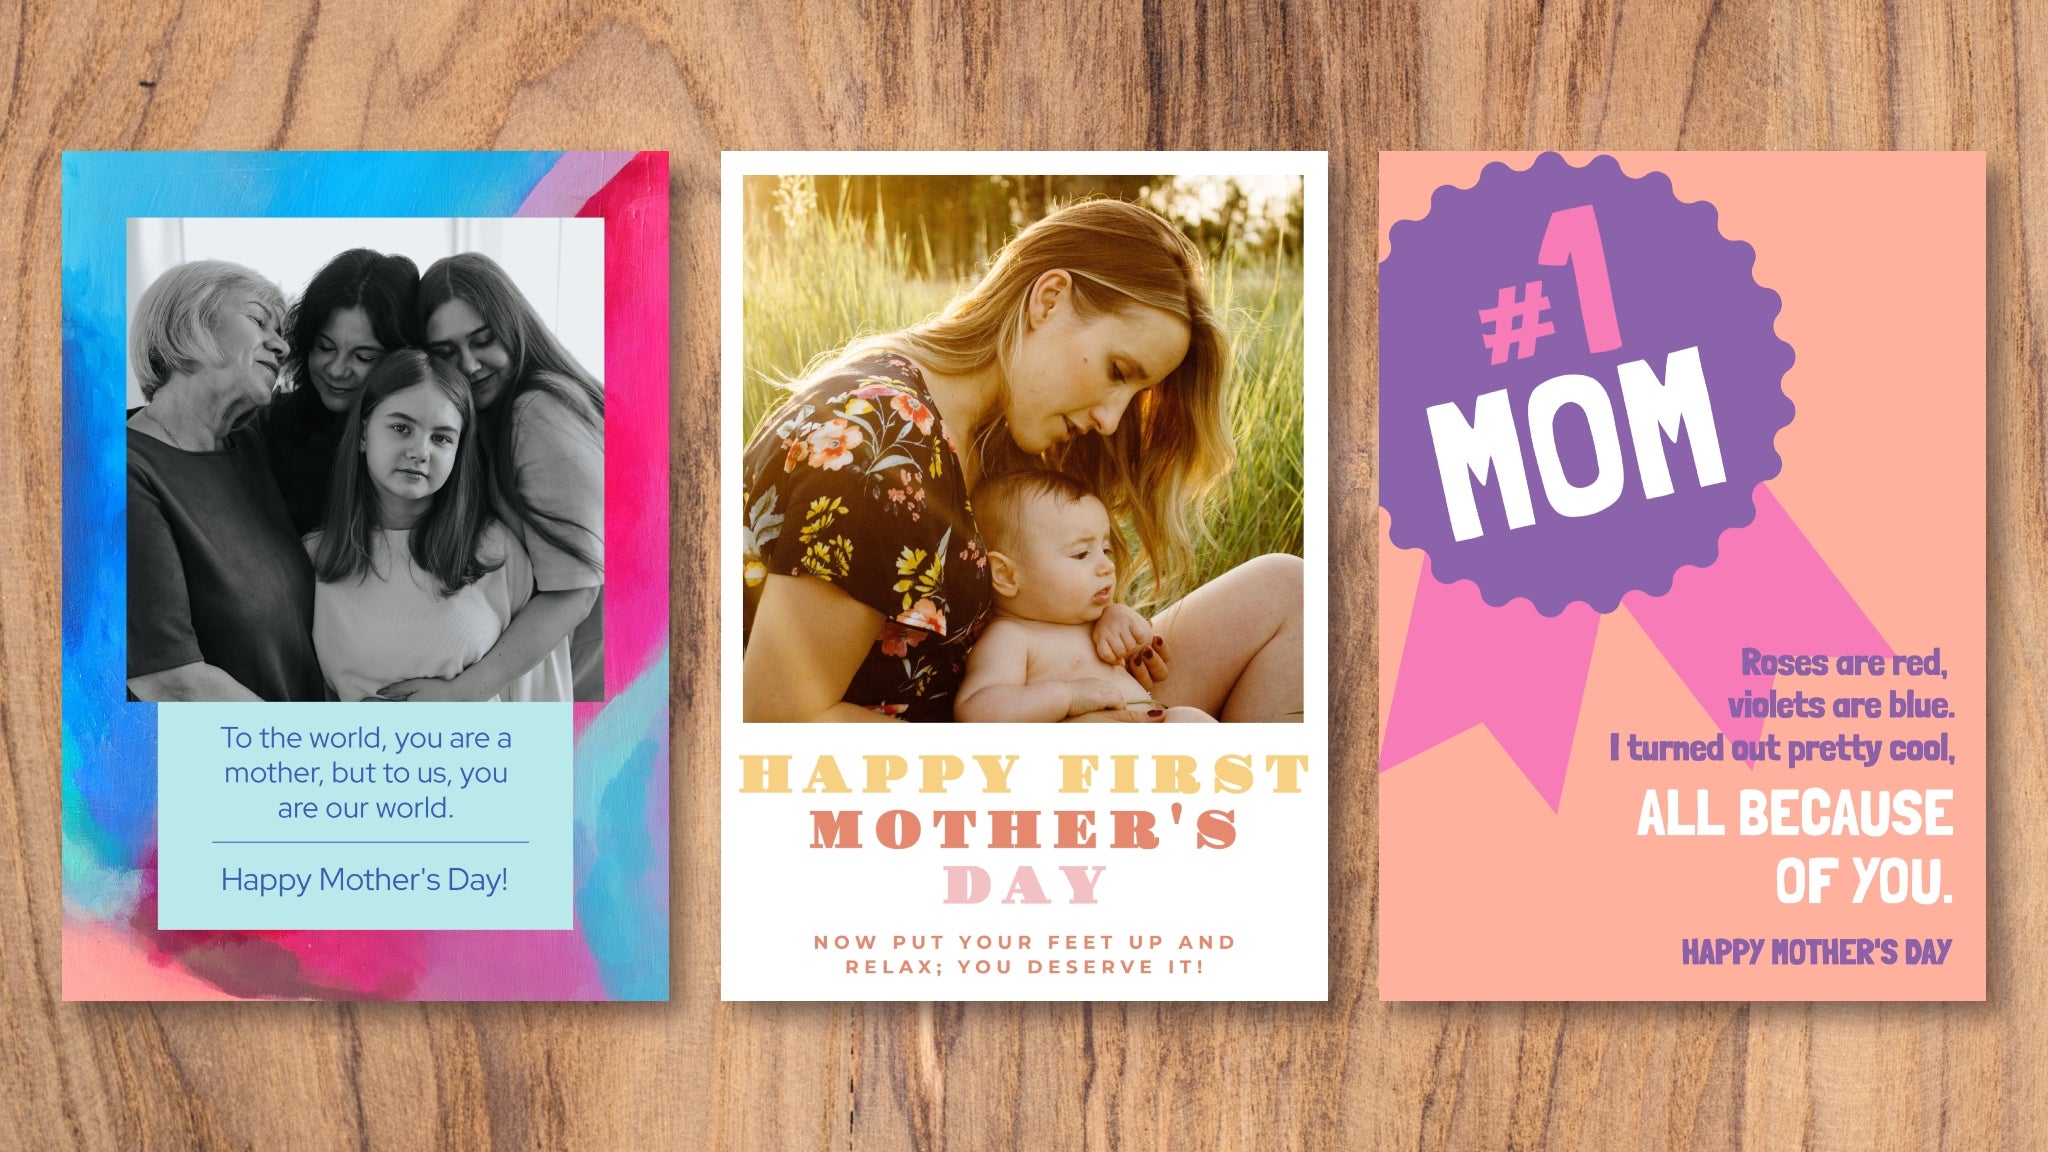 bradley robertson recommends stepmom mothers day quotes pic